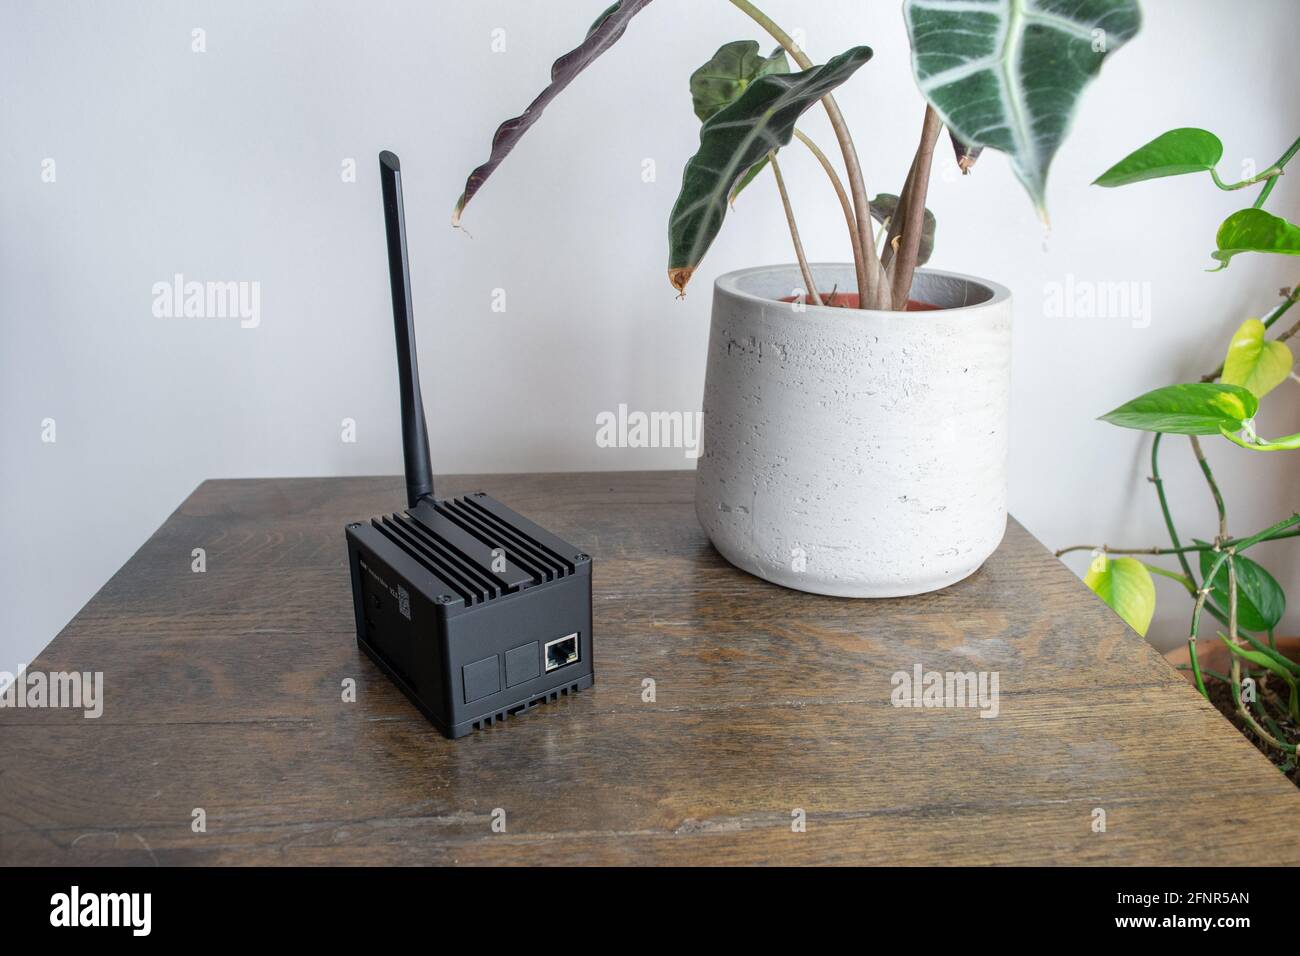 Helium hotspot cryptocurrency miner next to a plant in a home or office. Stock Photo